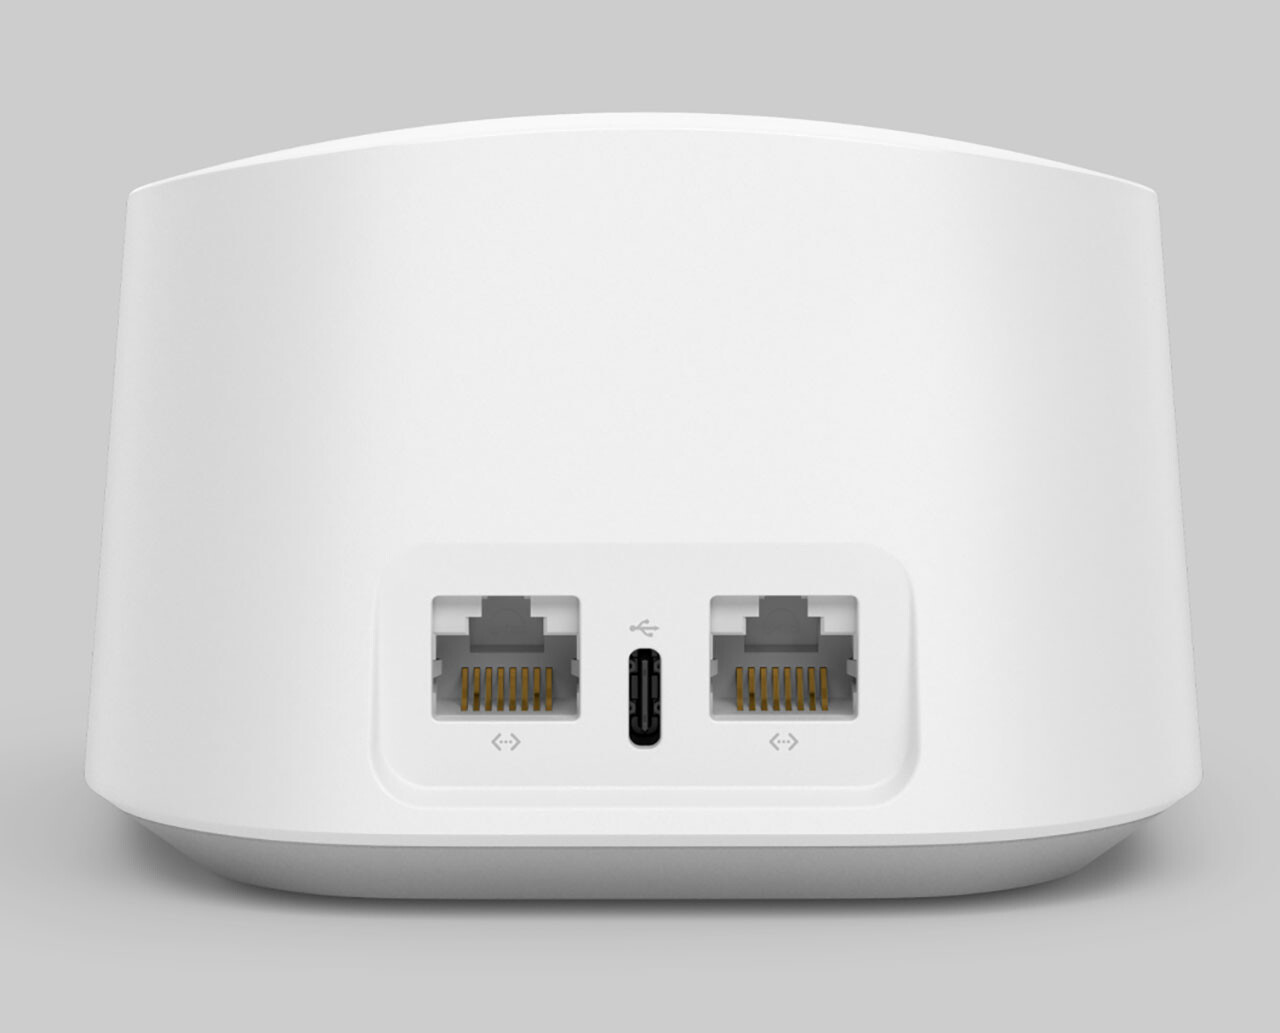 unveils a pricey but faster $599.99 eero Max 7